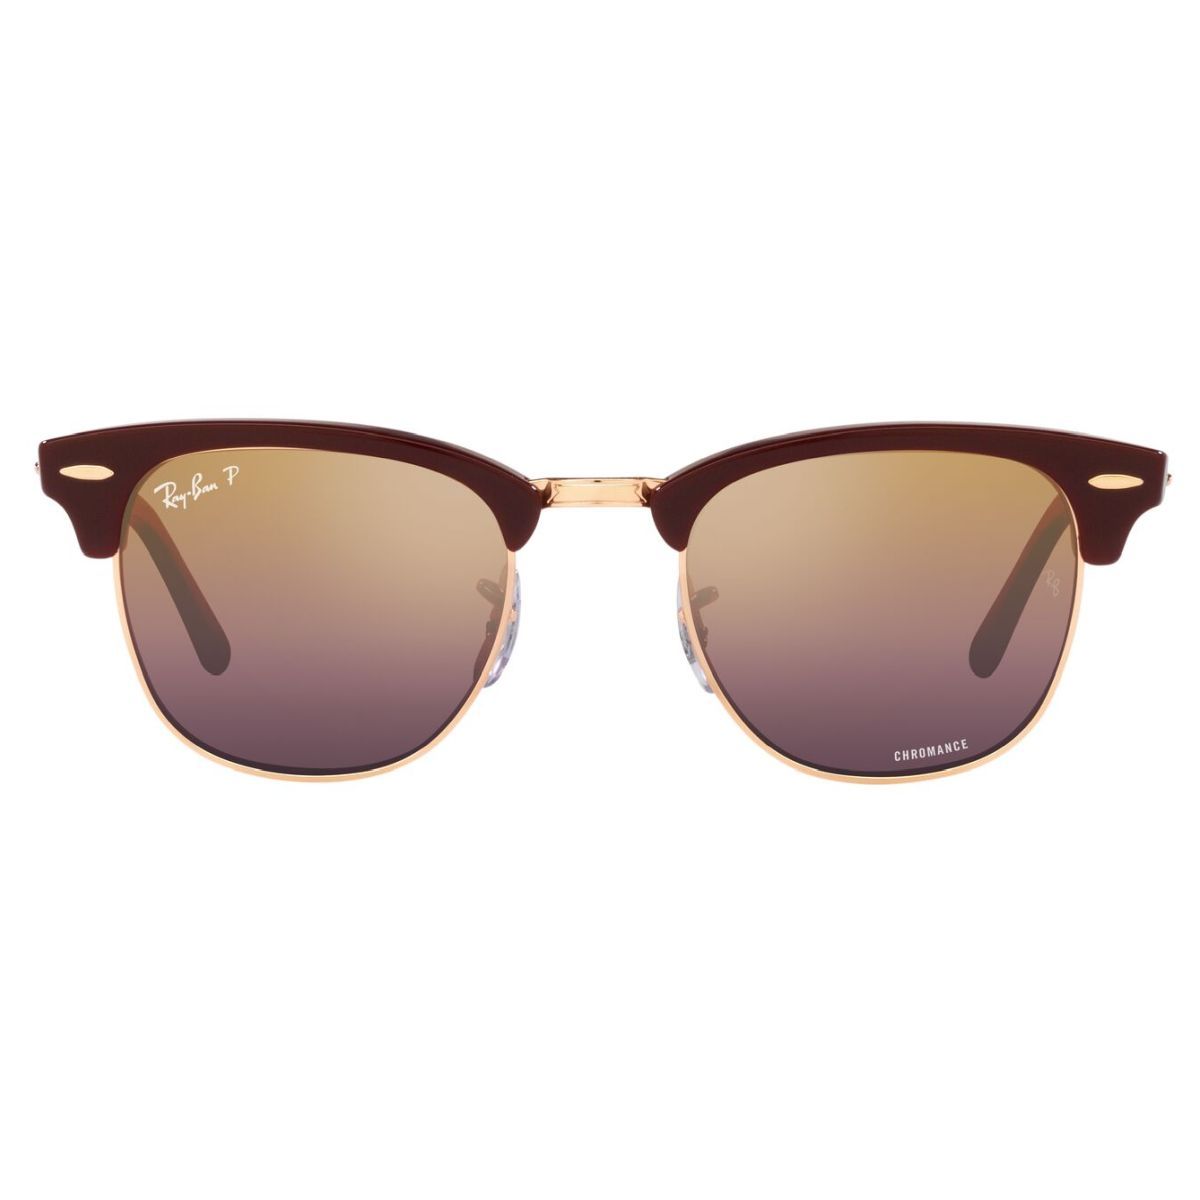 RAY-BAN CLUBMASTER 3016/1365G9/55